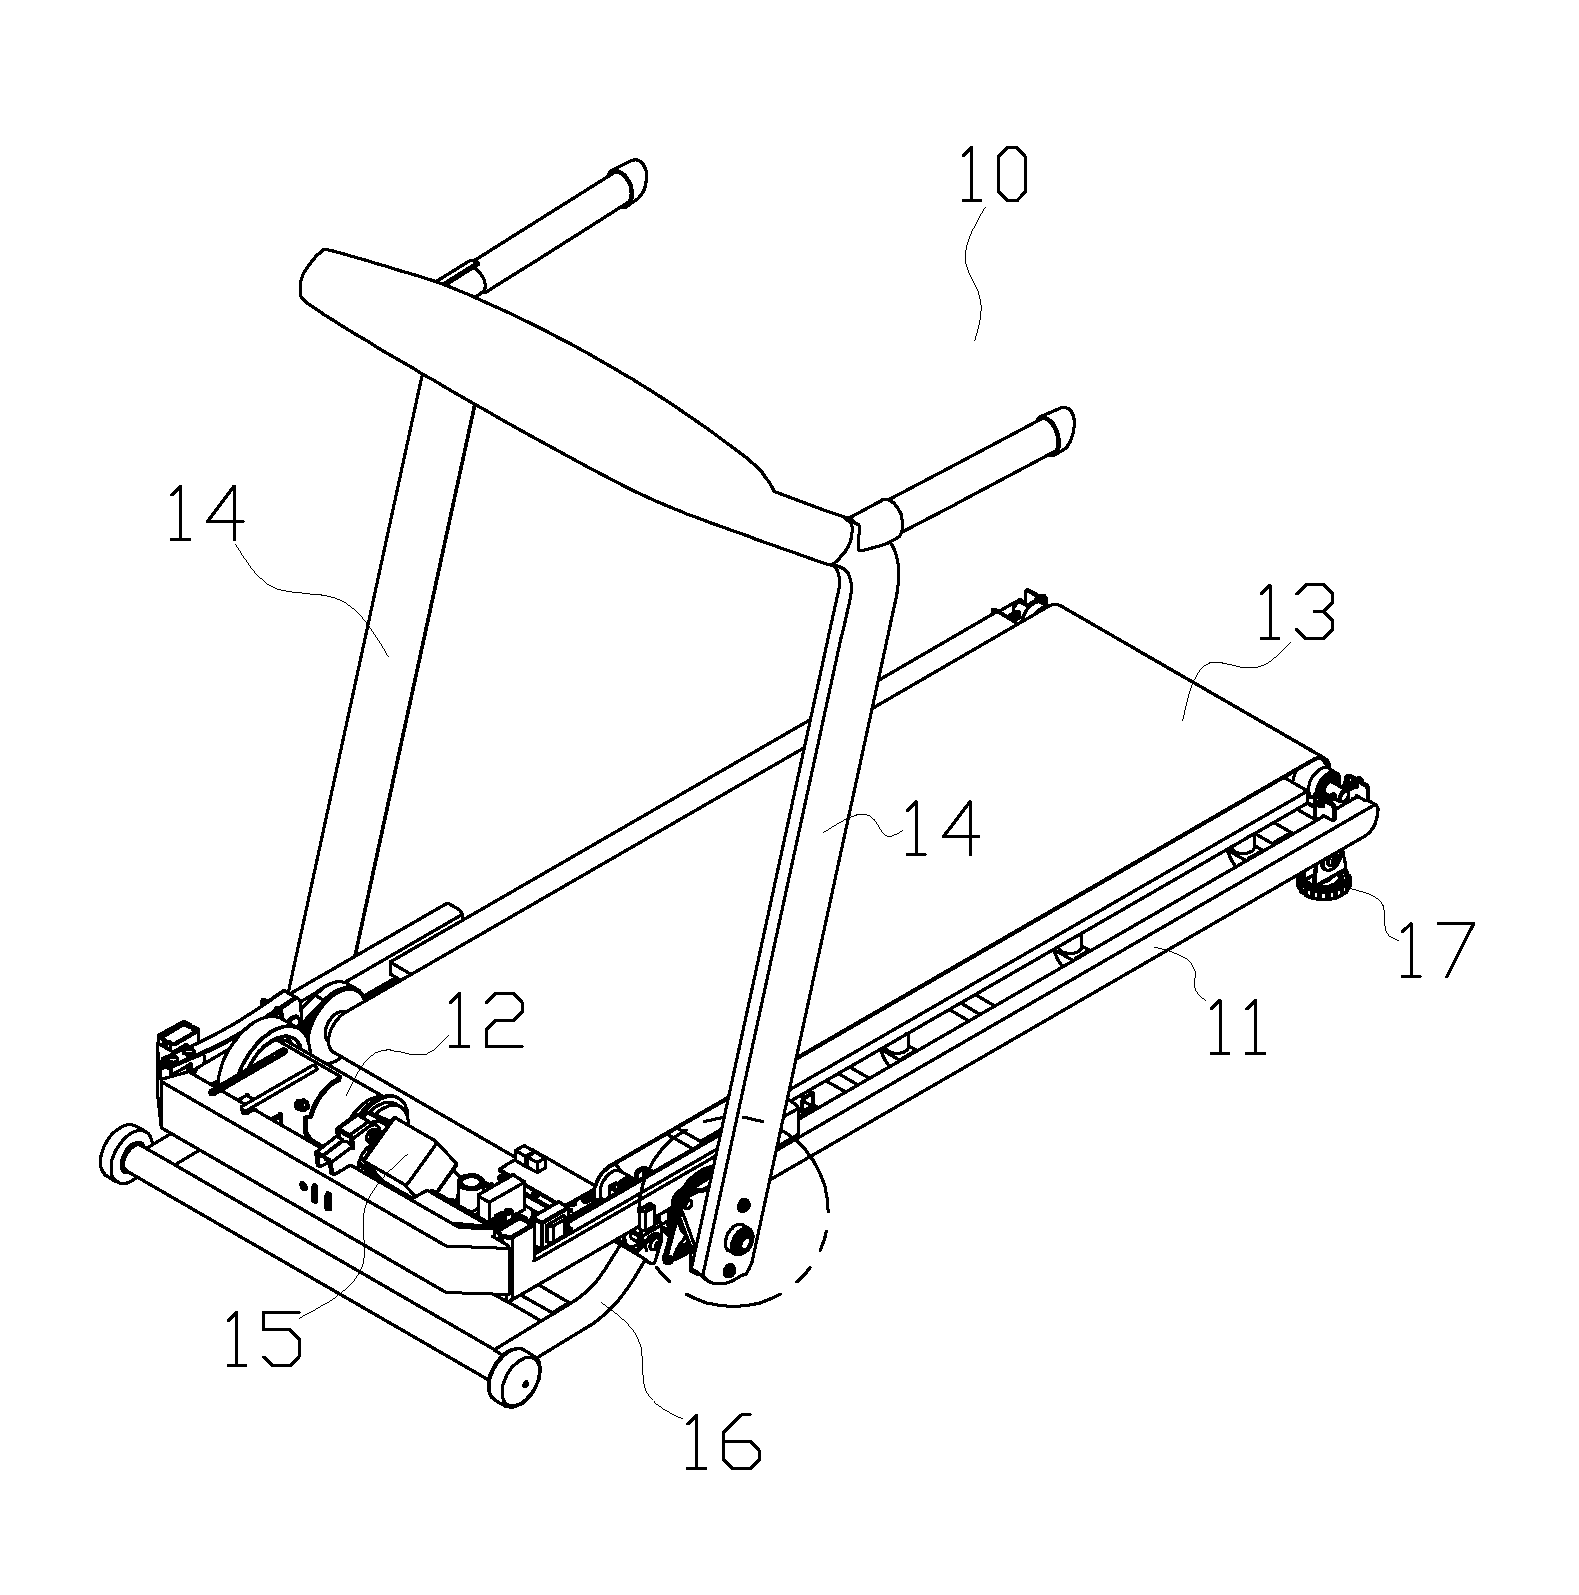 Electric treadmill with a folding mechanism